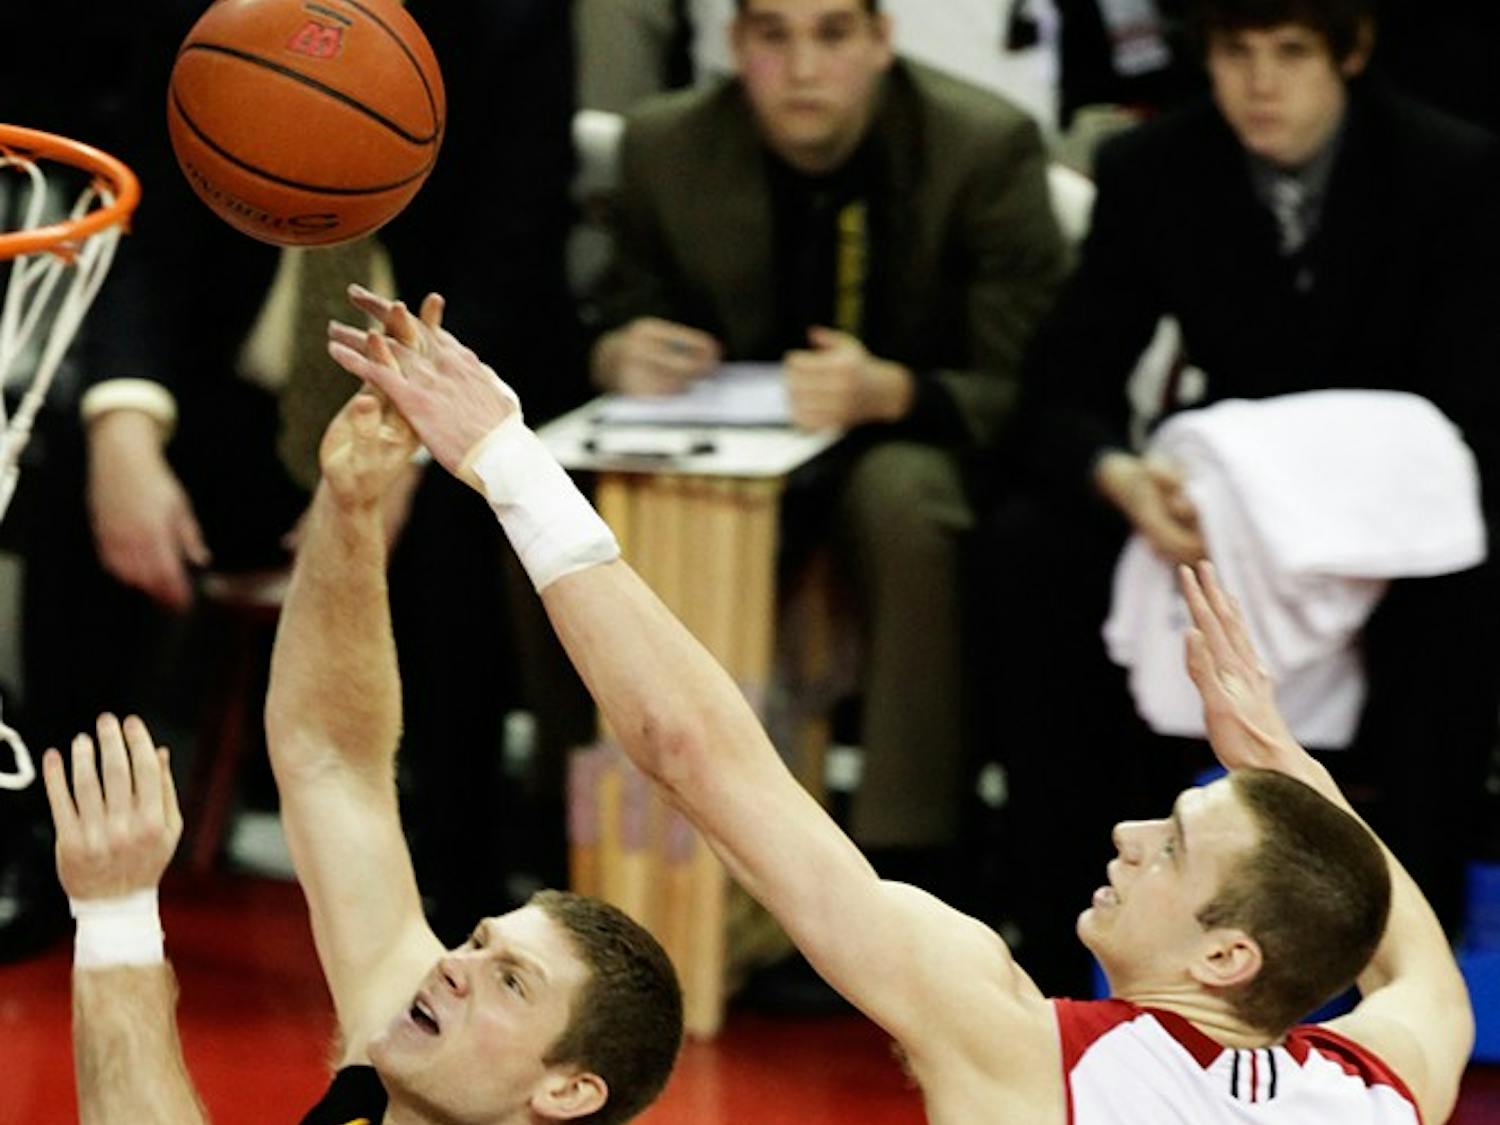 Badgers look to avenge home loss against Illini